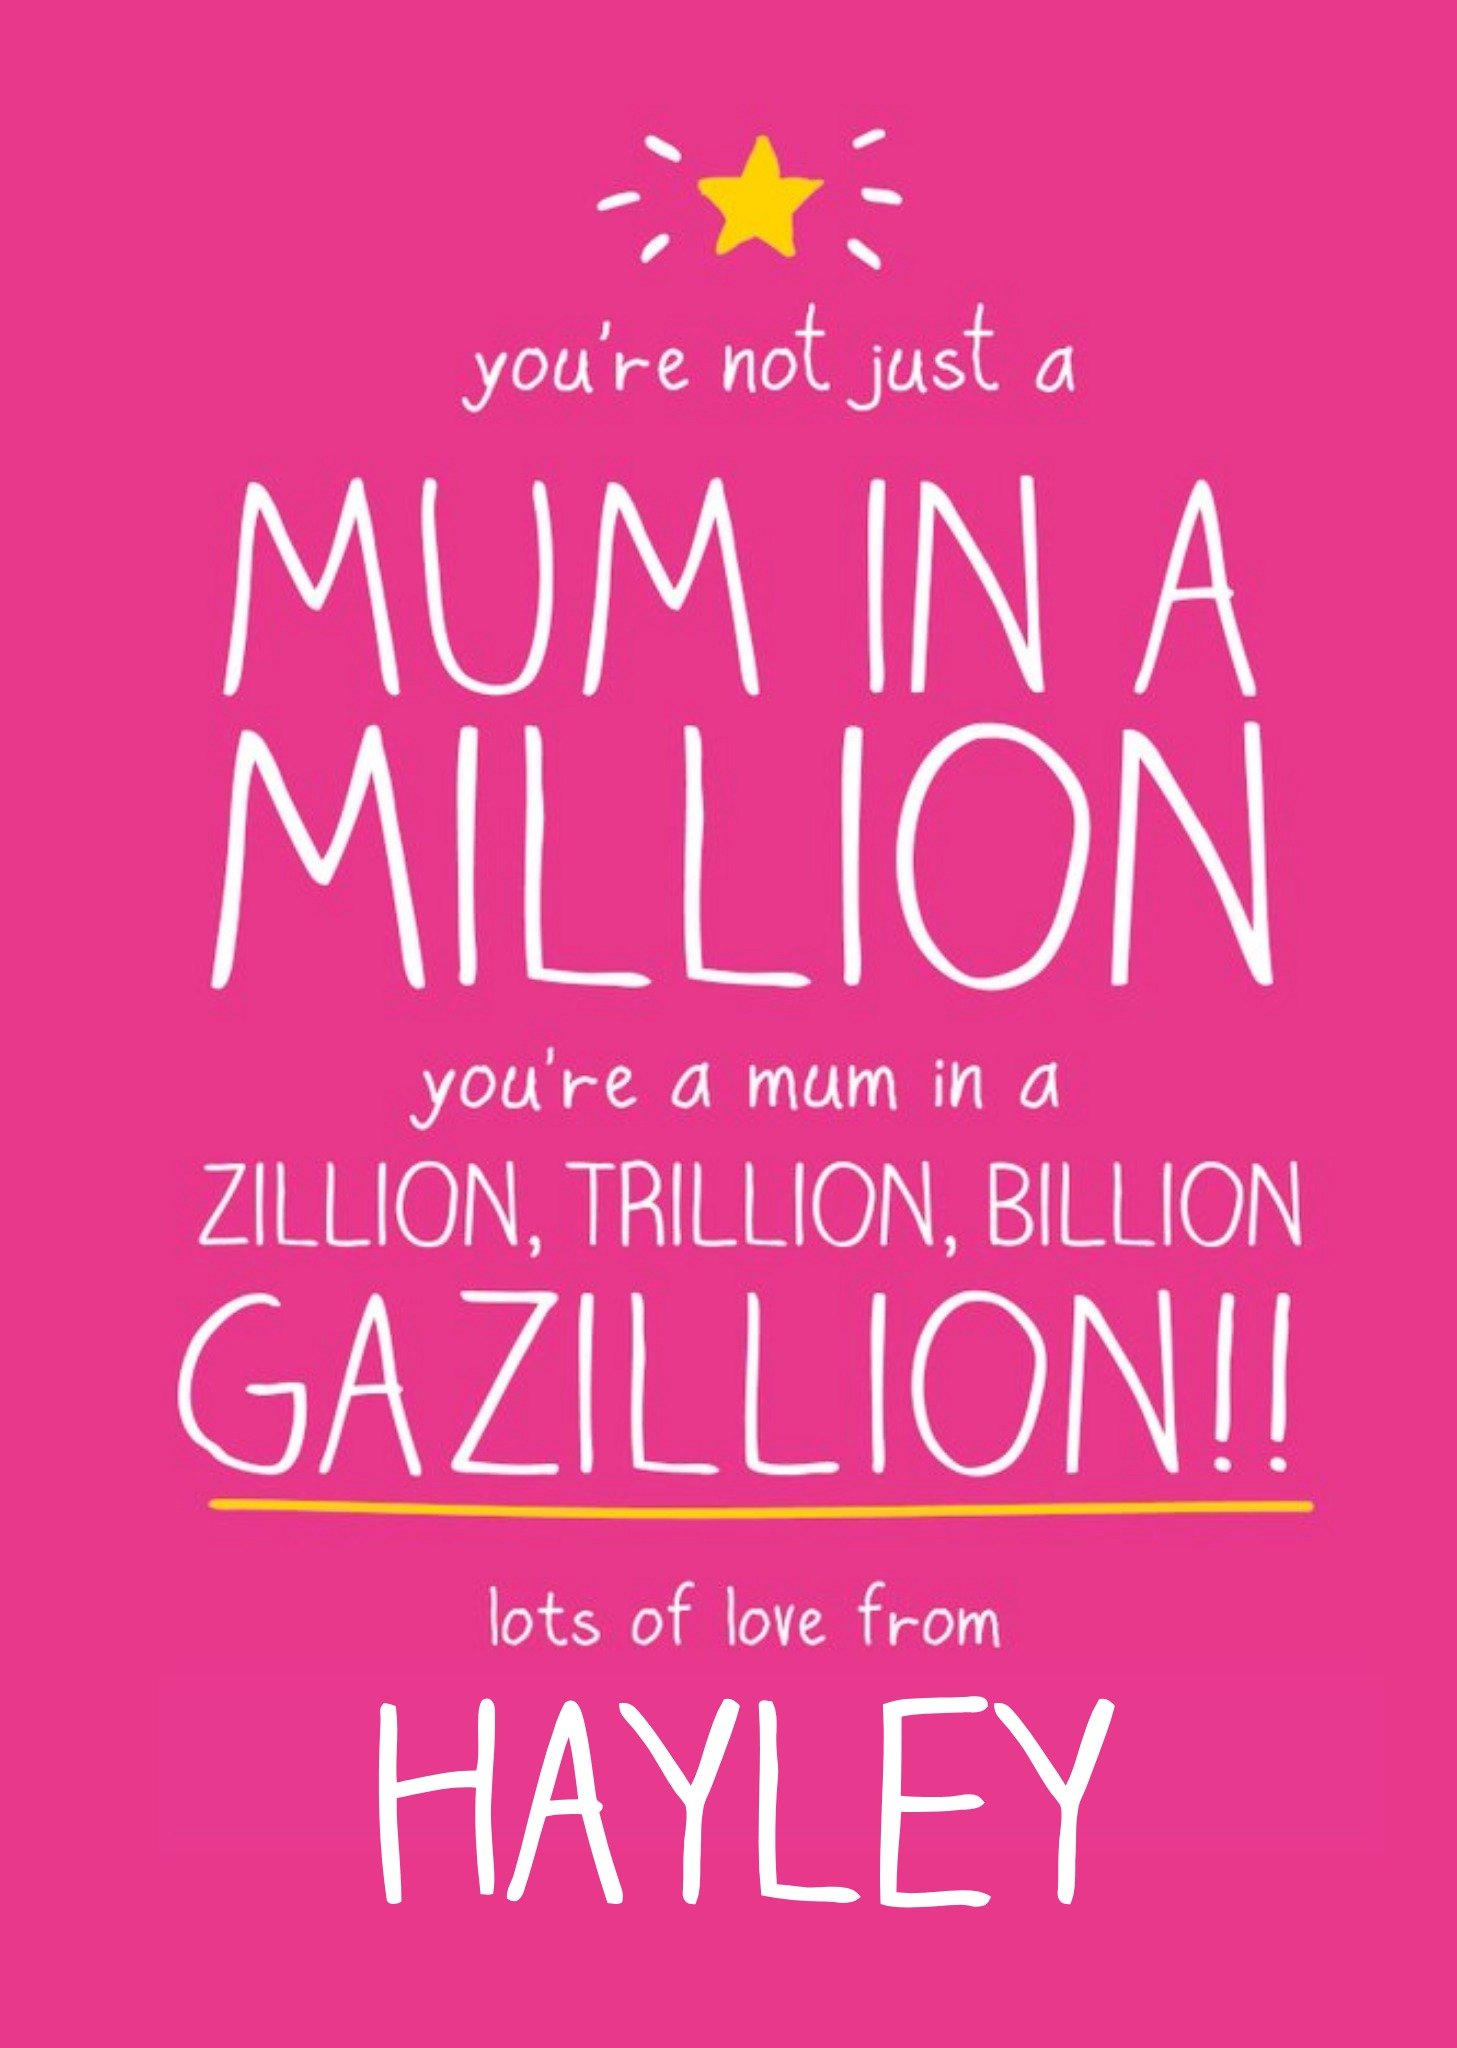 Happy Jackson Mum In A Gazillion Personalised Happy Mother's Day Card, Large